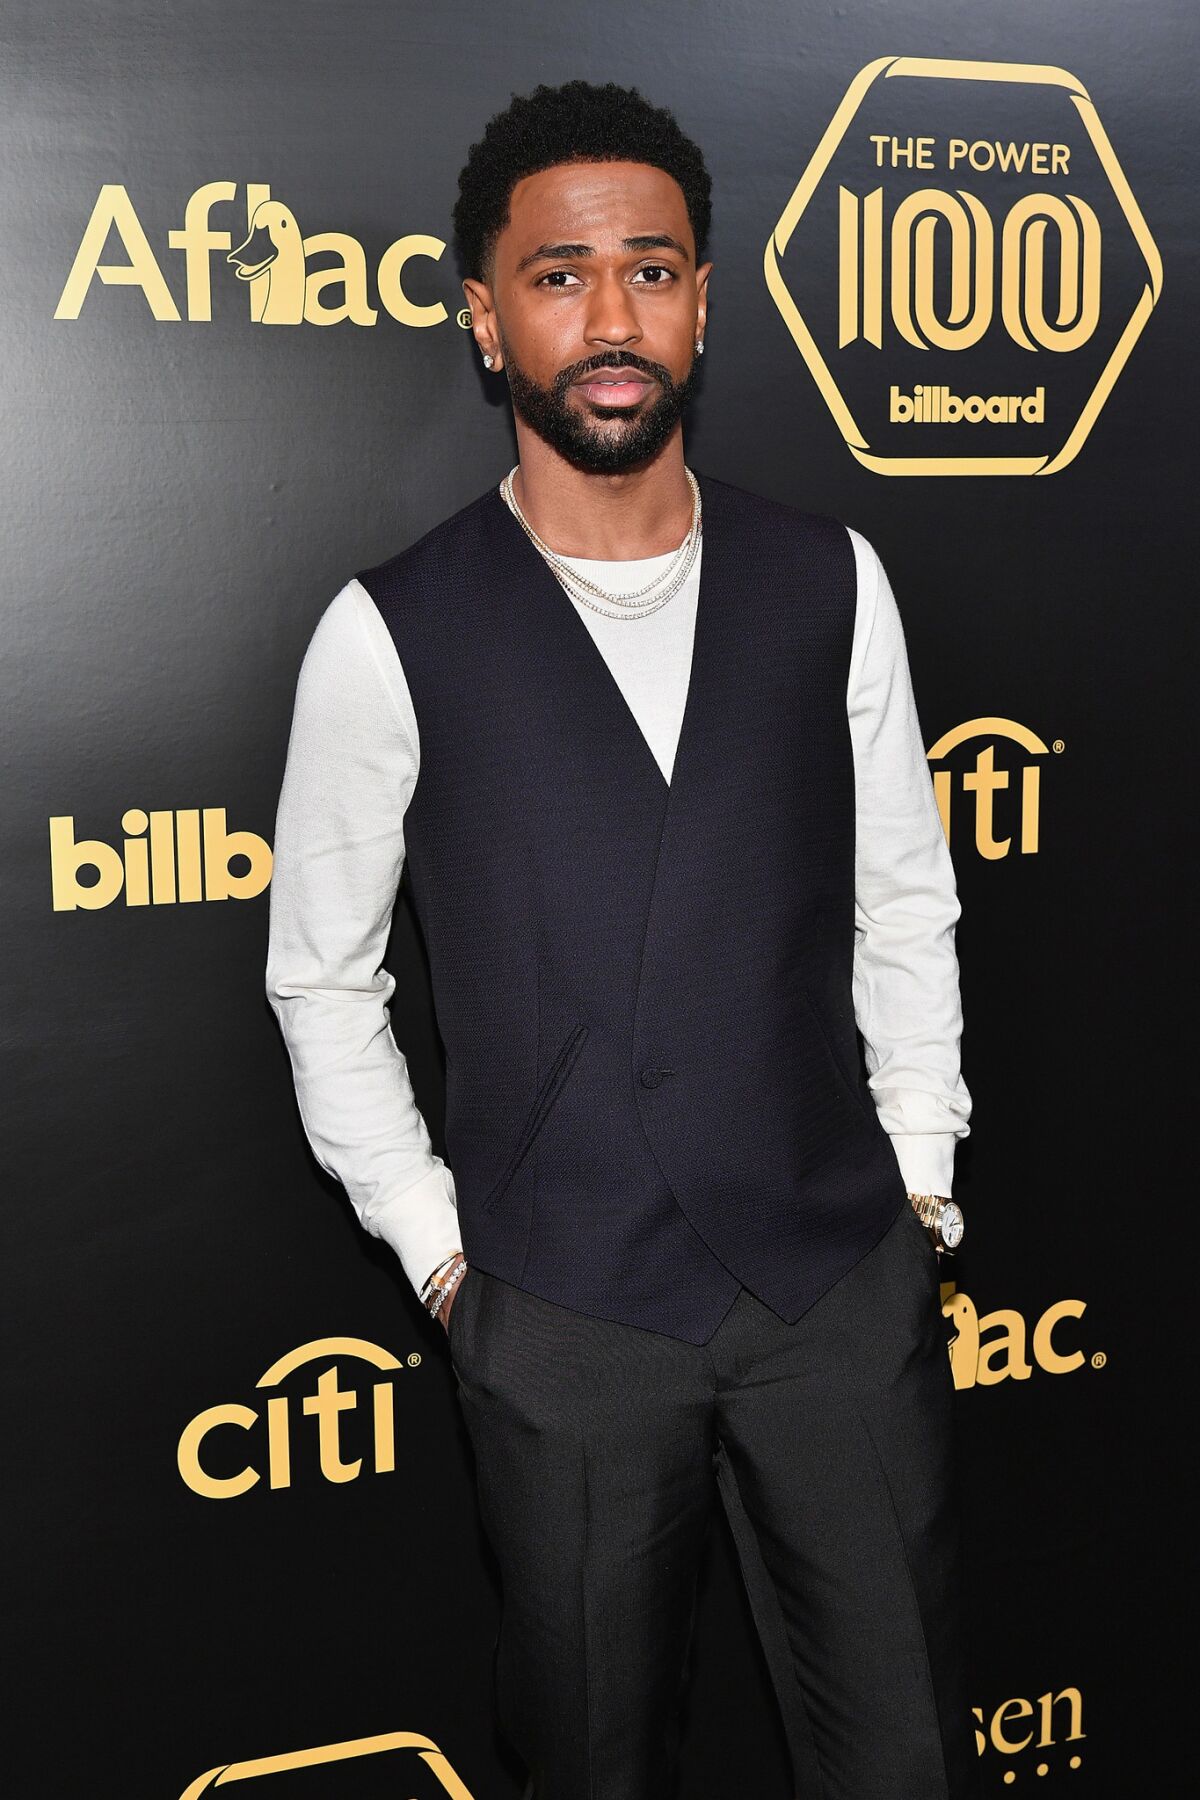 Rapper Big Sean at the Billboard Power 100 celebration in New York wearing Ermenegildo Zegna Couture mohair tuxedo trousers paired with a vest and white knit crewneck.